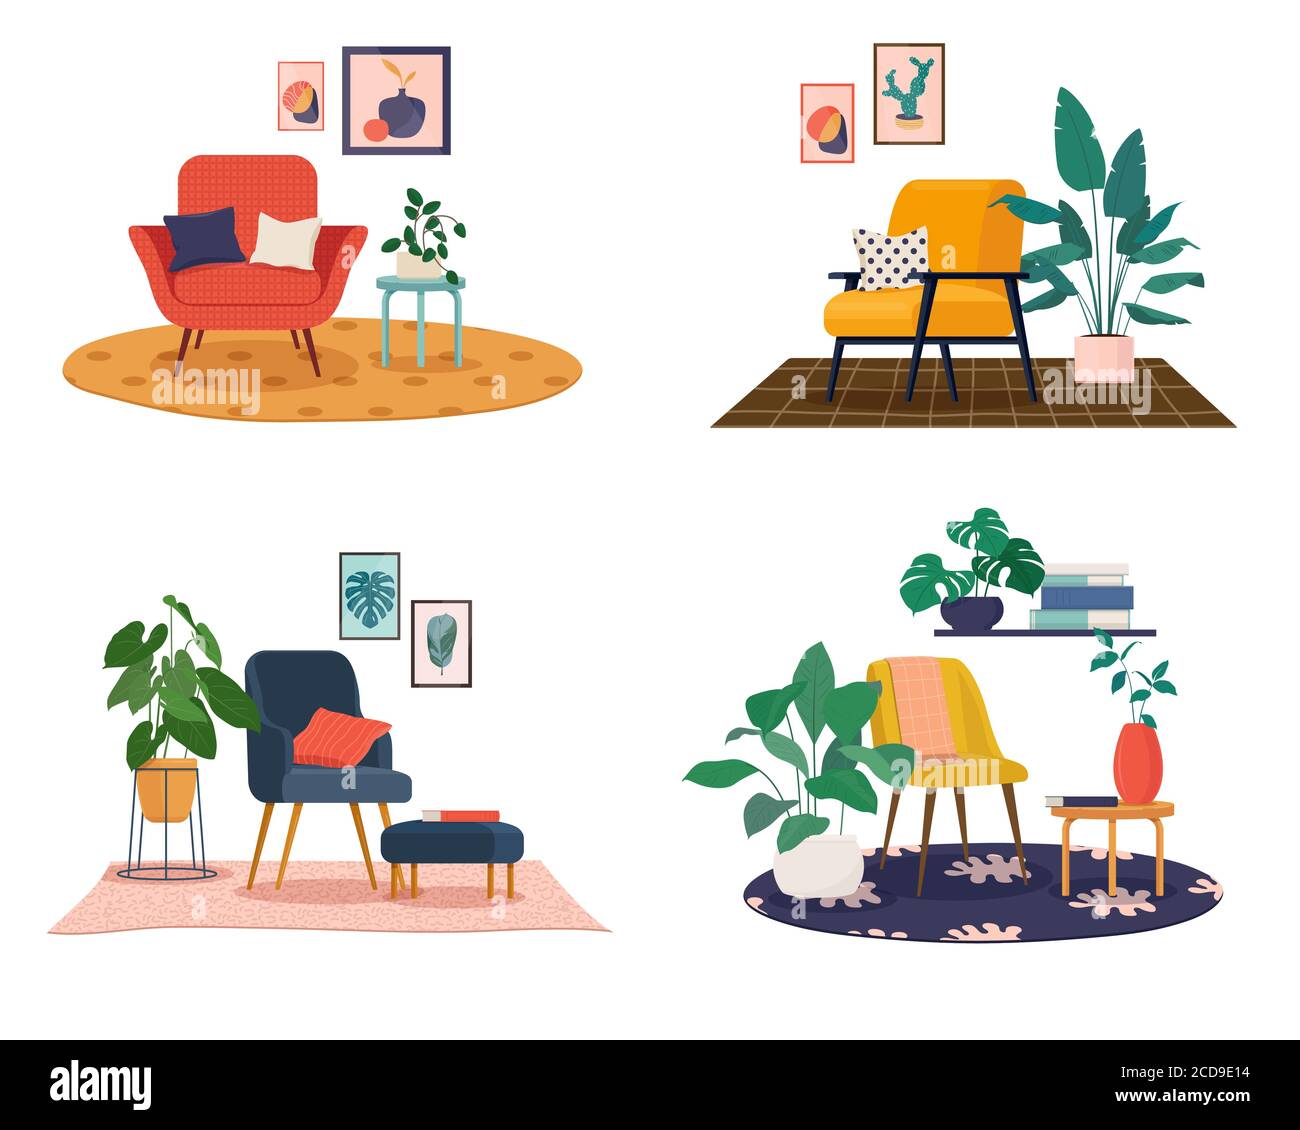 A set of various modern home furnishings Stock Vector